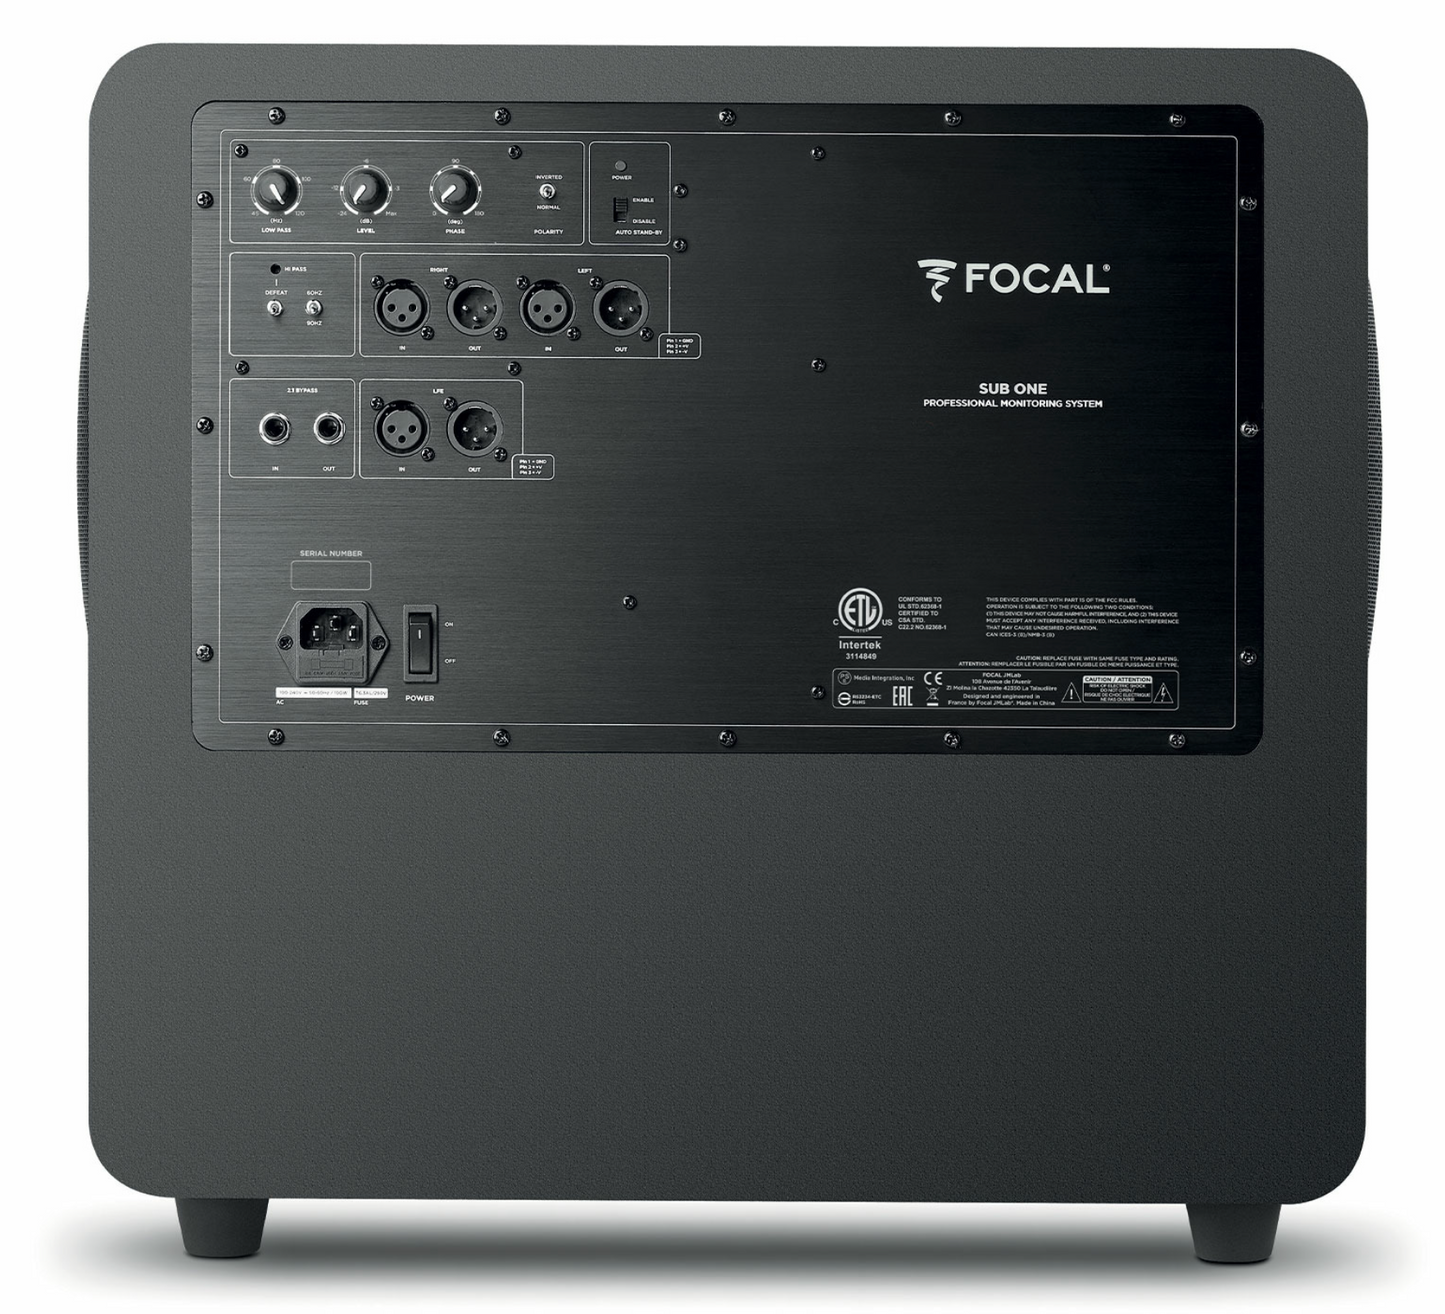 Focal Sub One Active Studio Subwoofer, side shows inputs